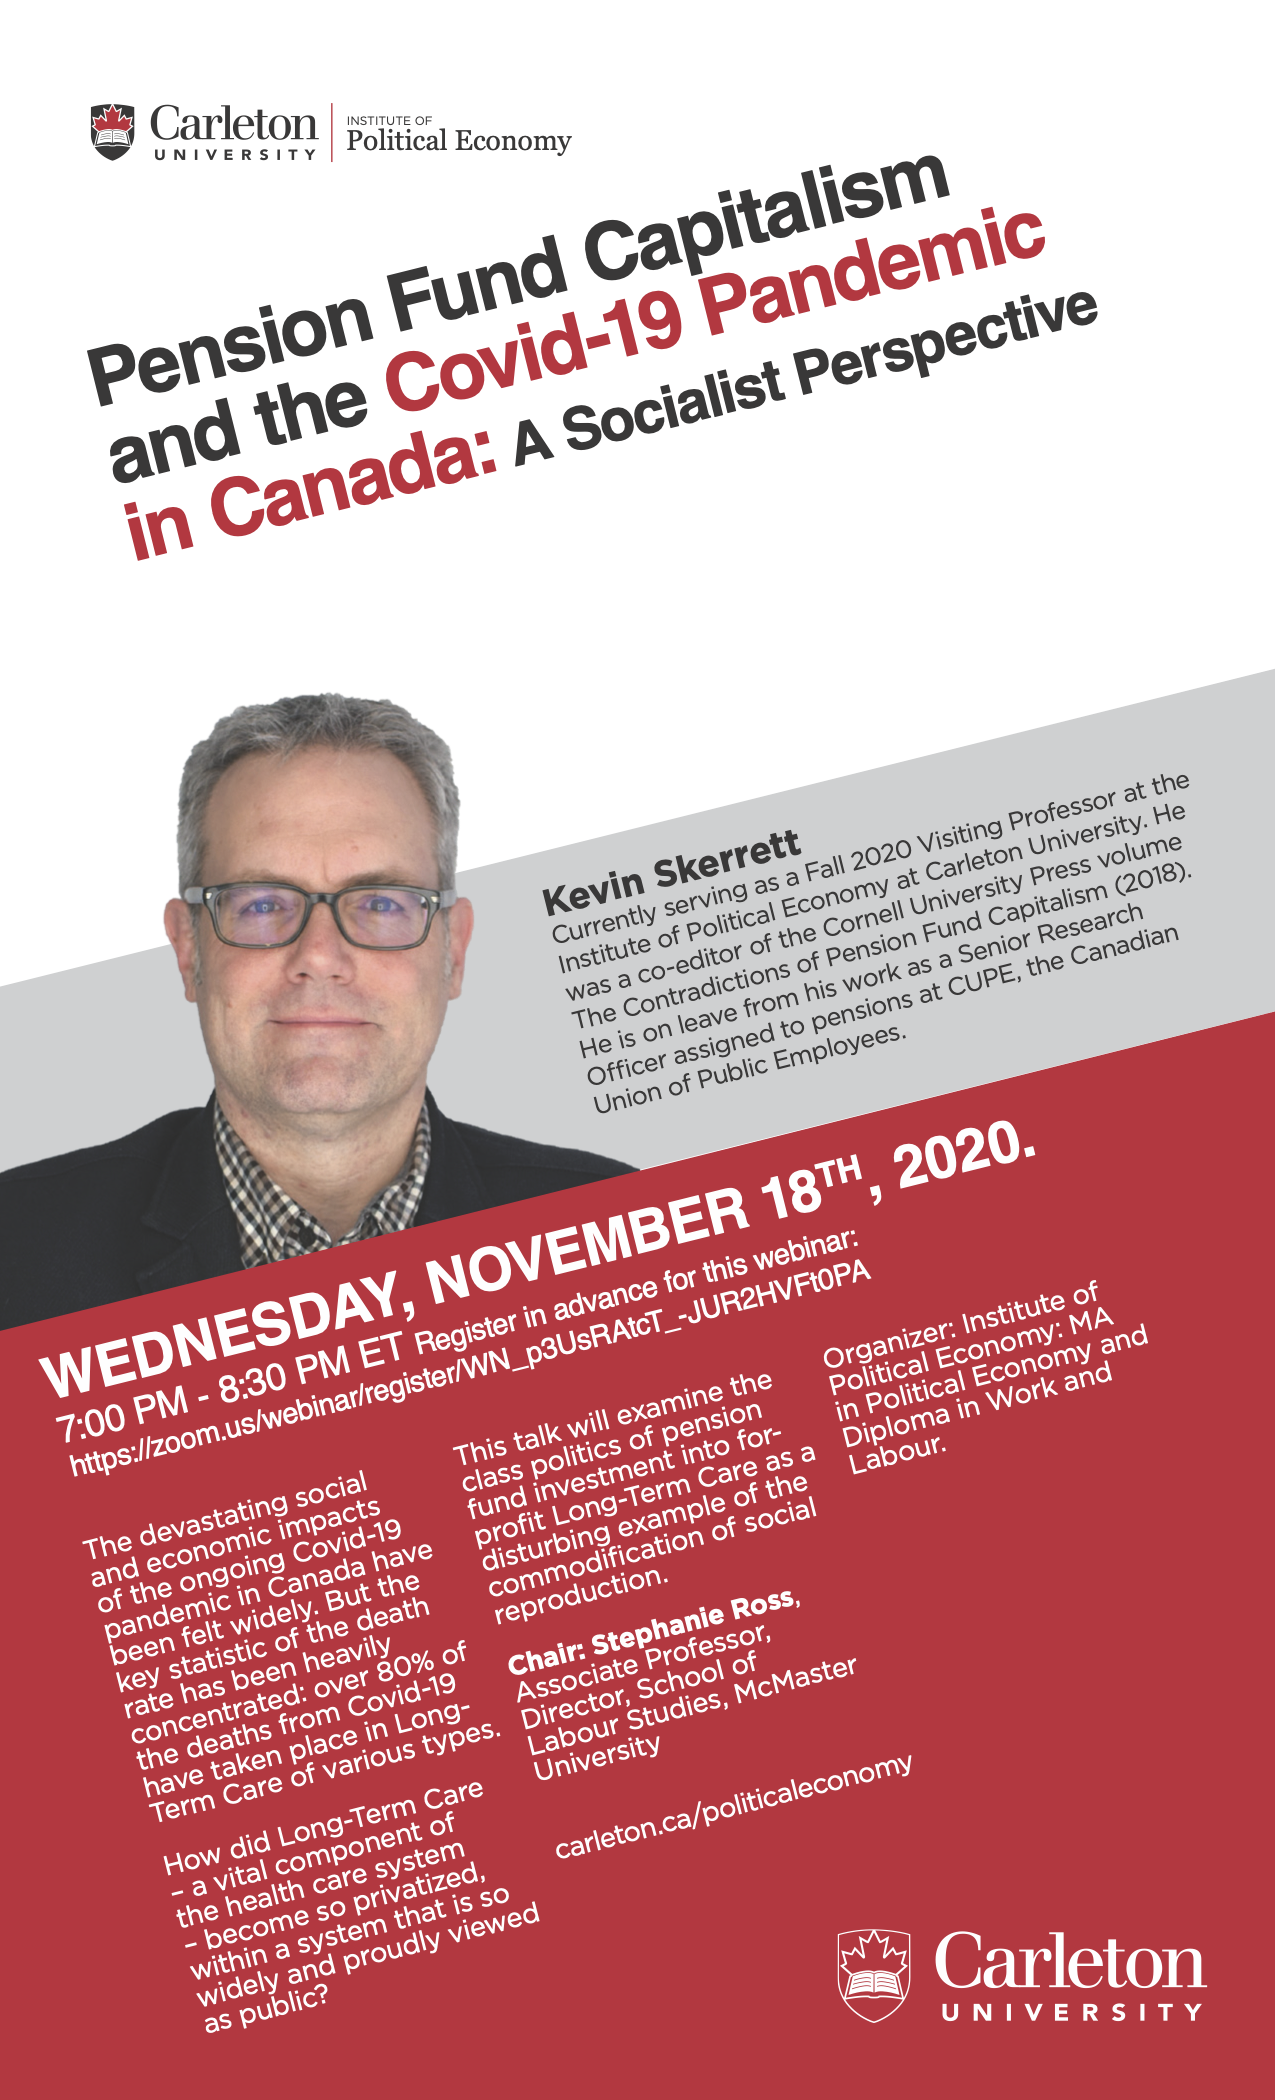 Poster for Event: Pension Fund Capitalism and the Covid-19 Pandemic in Canada: A Socialist Perspective. Blocks of White, Grey and Red background with text overlay. Image of presenter with grey hair, black suit and glasses. Text reads: The devastating social and economic impacts of the ongoing Covid-19 pandemic in Canada have been felt widely. But the key statistic of the death rate has been heavily concentrated: over 80% of the deaths from Covid-19 have taken place in Long-Term Care of various types. How did Long-Term Care – a vital component of the health care system – become so privatized, within a system that is so widely and proudly viewed as public? This talk will examine this topic in the light of recent debates on the commodification of social reproduction, financialization, and pension fund capitalism. It will conclude with a discussion of the “Make Revera Public” campaign and other transformational strategies.